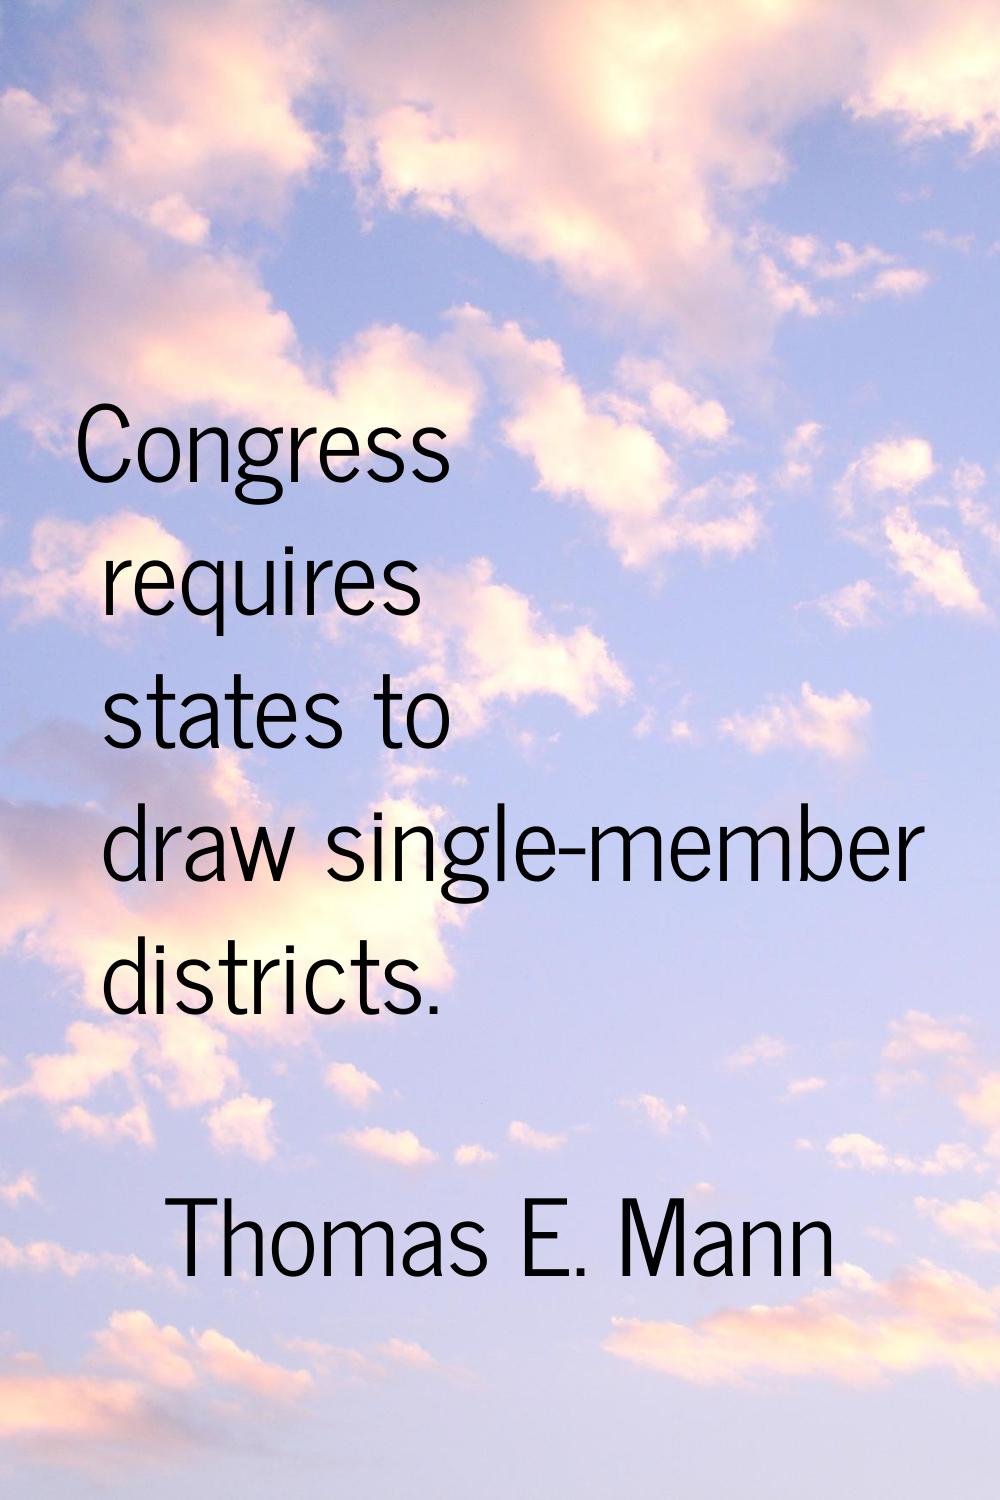 Congress requires states to draw single-member districts.